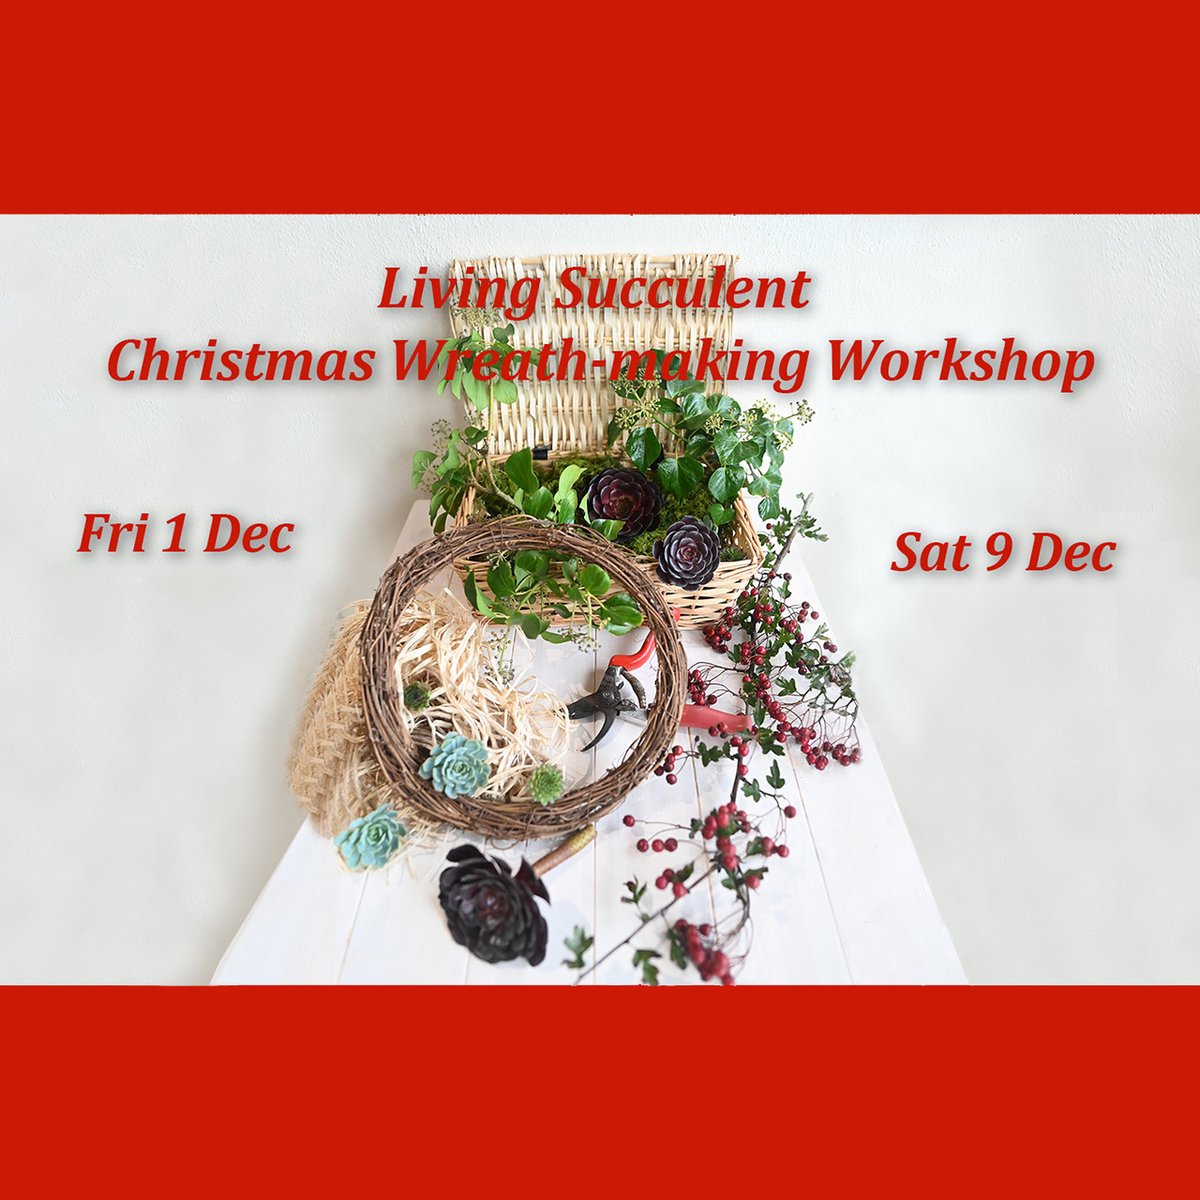 Add a touch of Cornish magic to your Chistmas with a gorgeous wreath of living succulents from the Minack. Tickets for our wreath-making workshops are selling fast, so book now! minack.com/whats-on/livin…